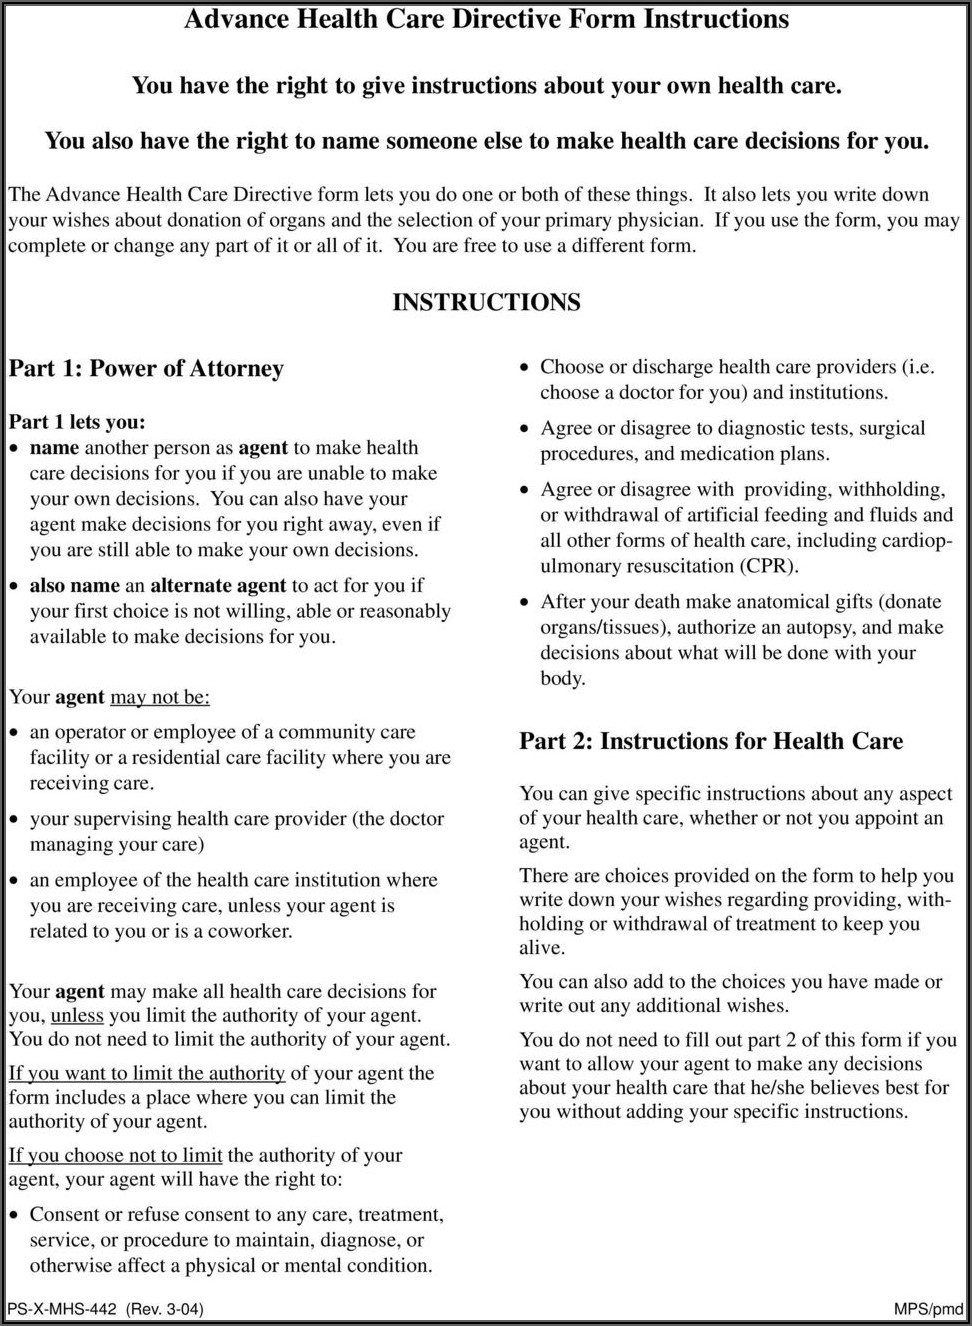 Advance Health Care Directive Form Instructions